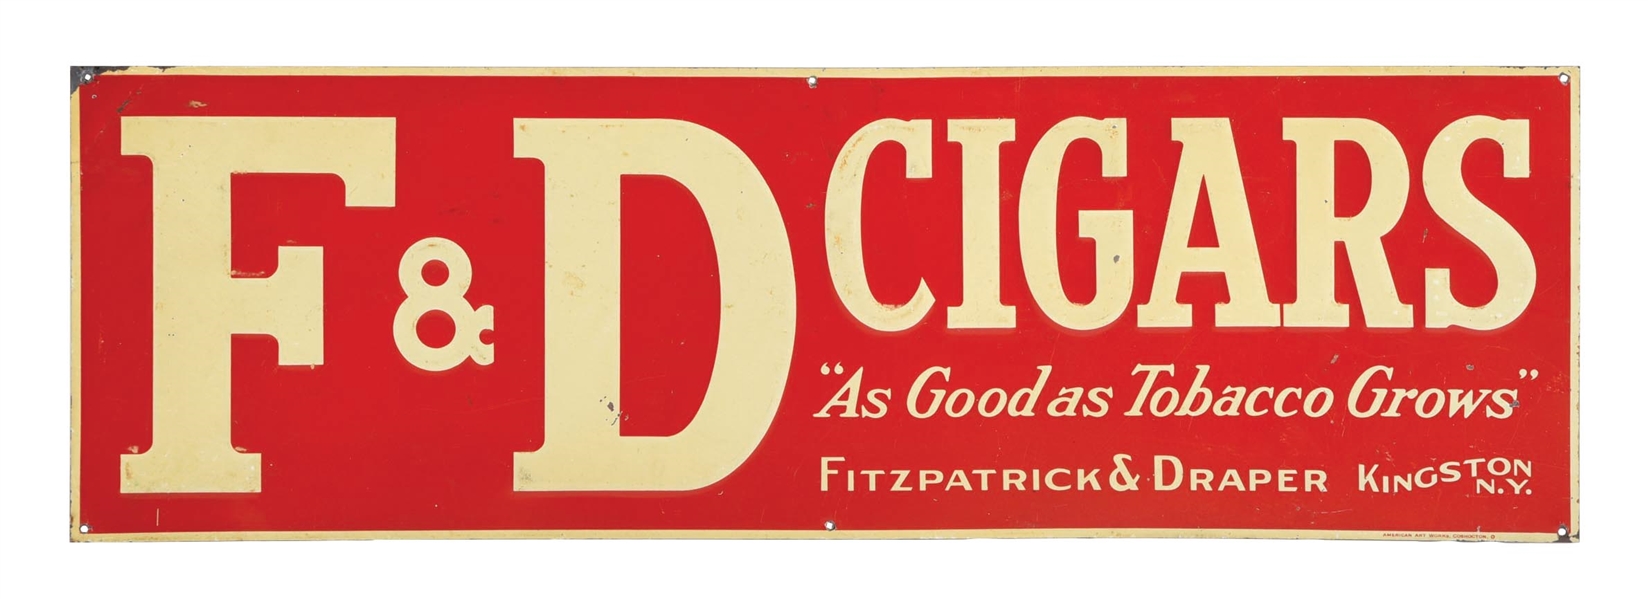 F & D CIGARS EMBOSSED TIN SIGN.